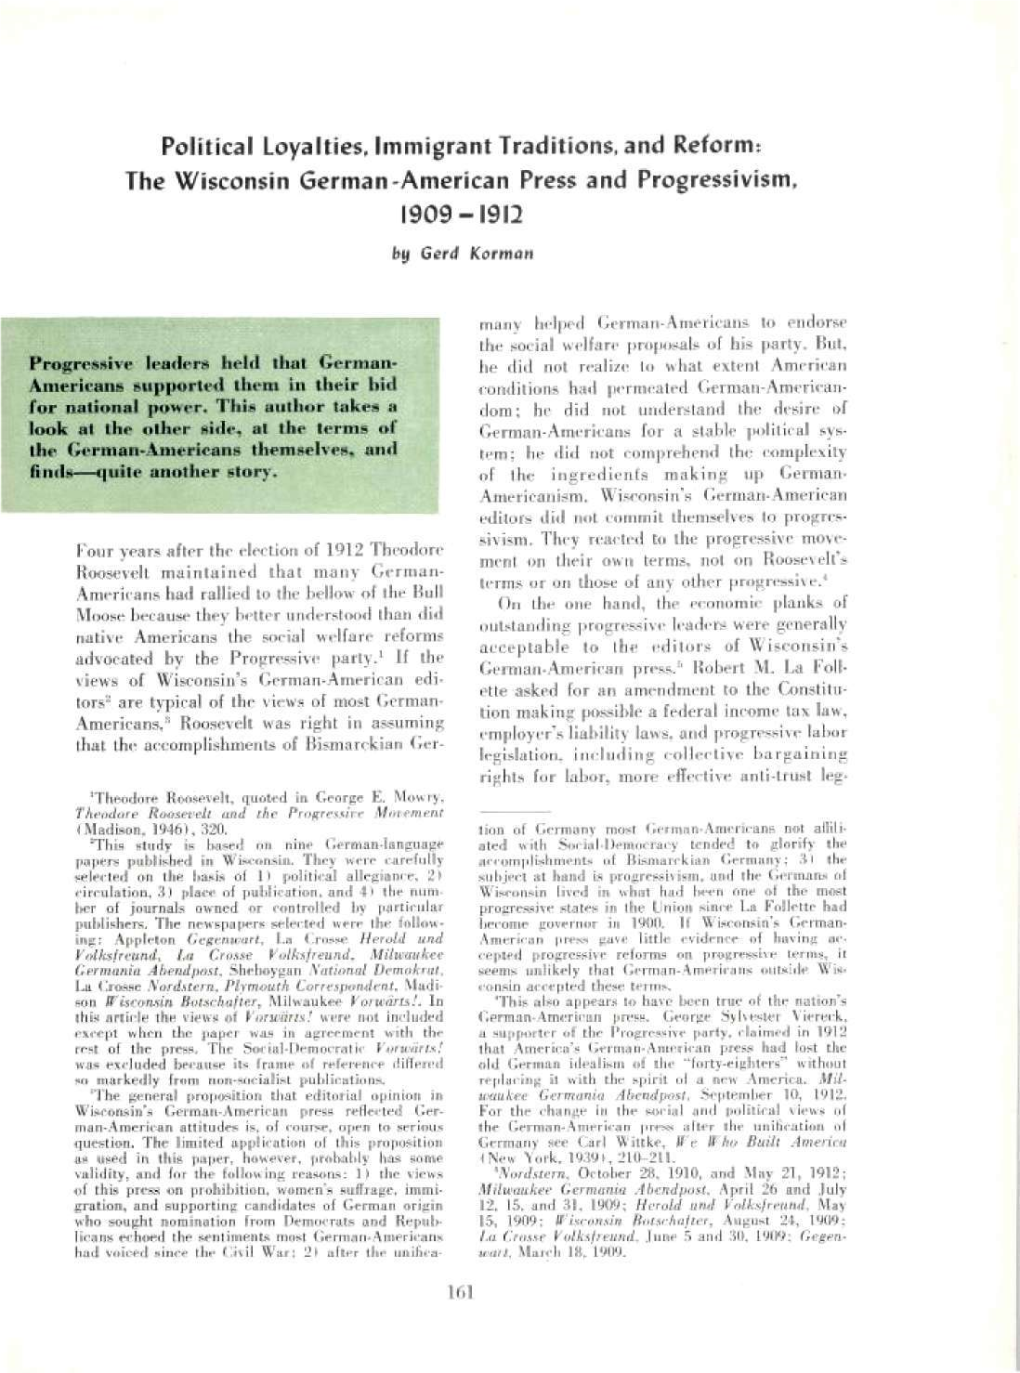 Political Loyalties, Immigrant Traditions, and Reform: the Wisconsin German-American Press and Progressivisnit 1909-1912